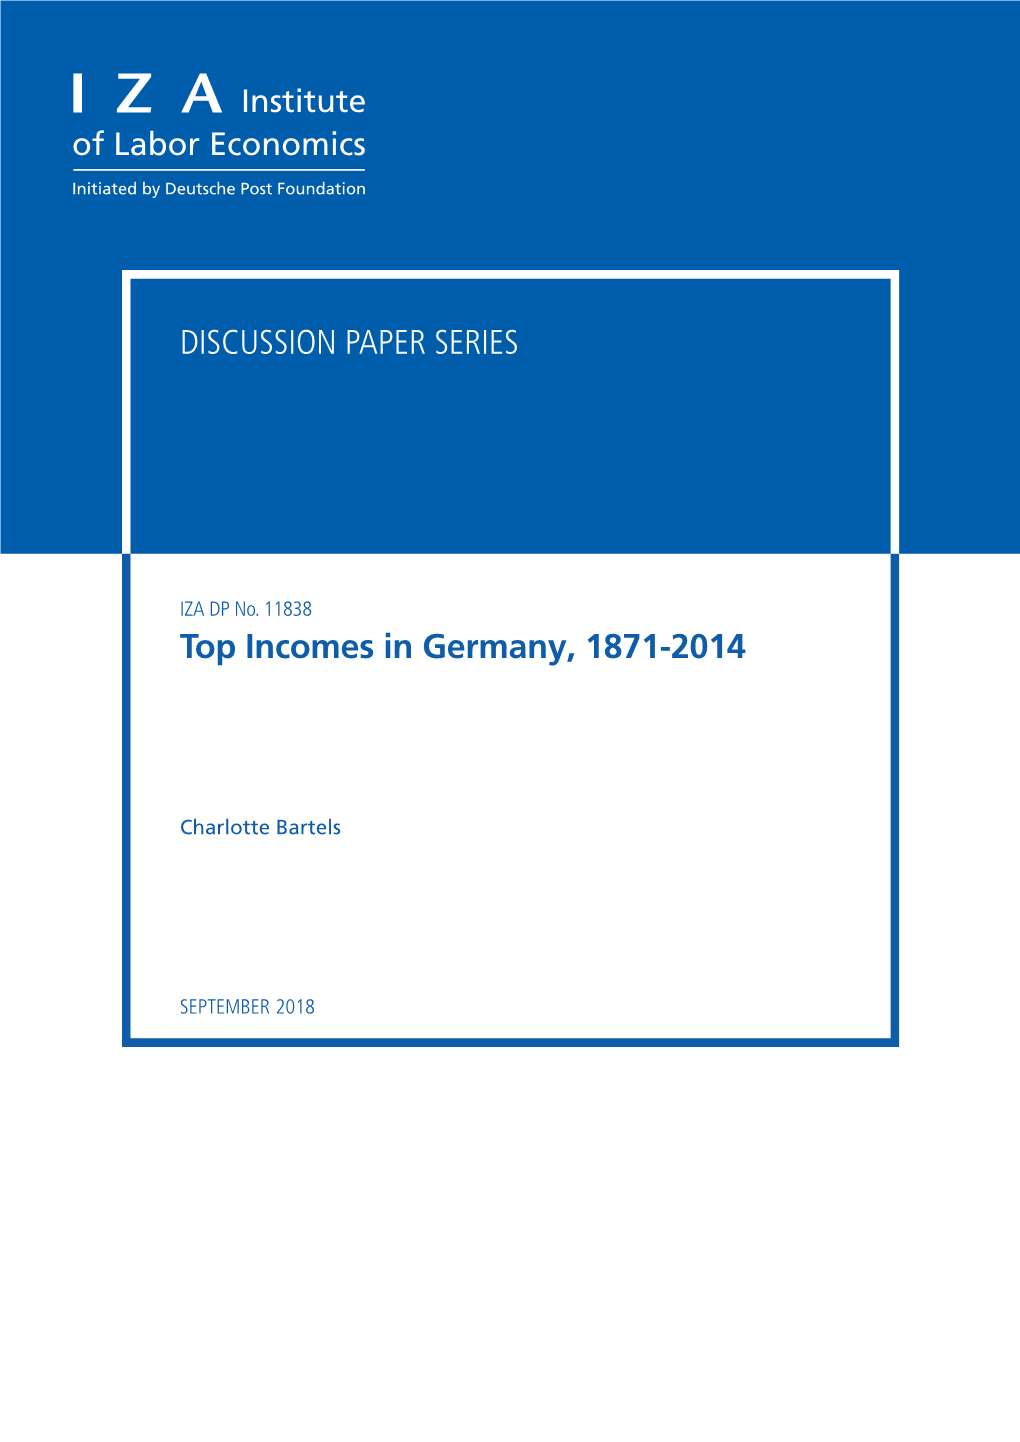 DISCUSSION PAPER SERIES Top Incomes in Germany, 1871-2014